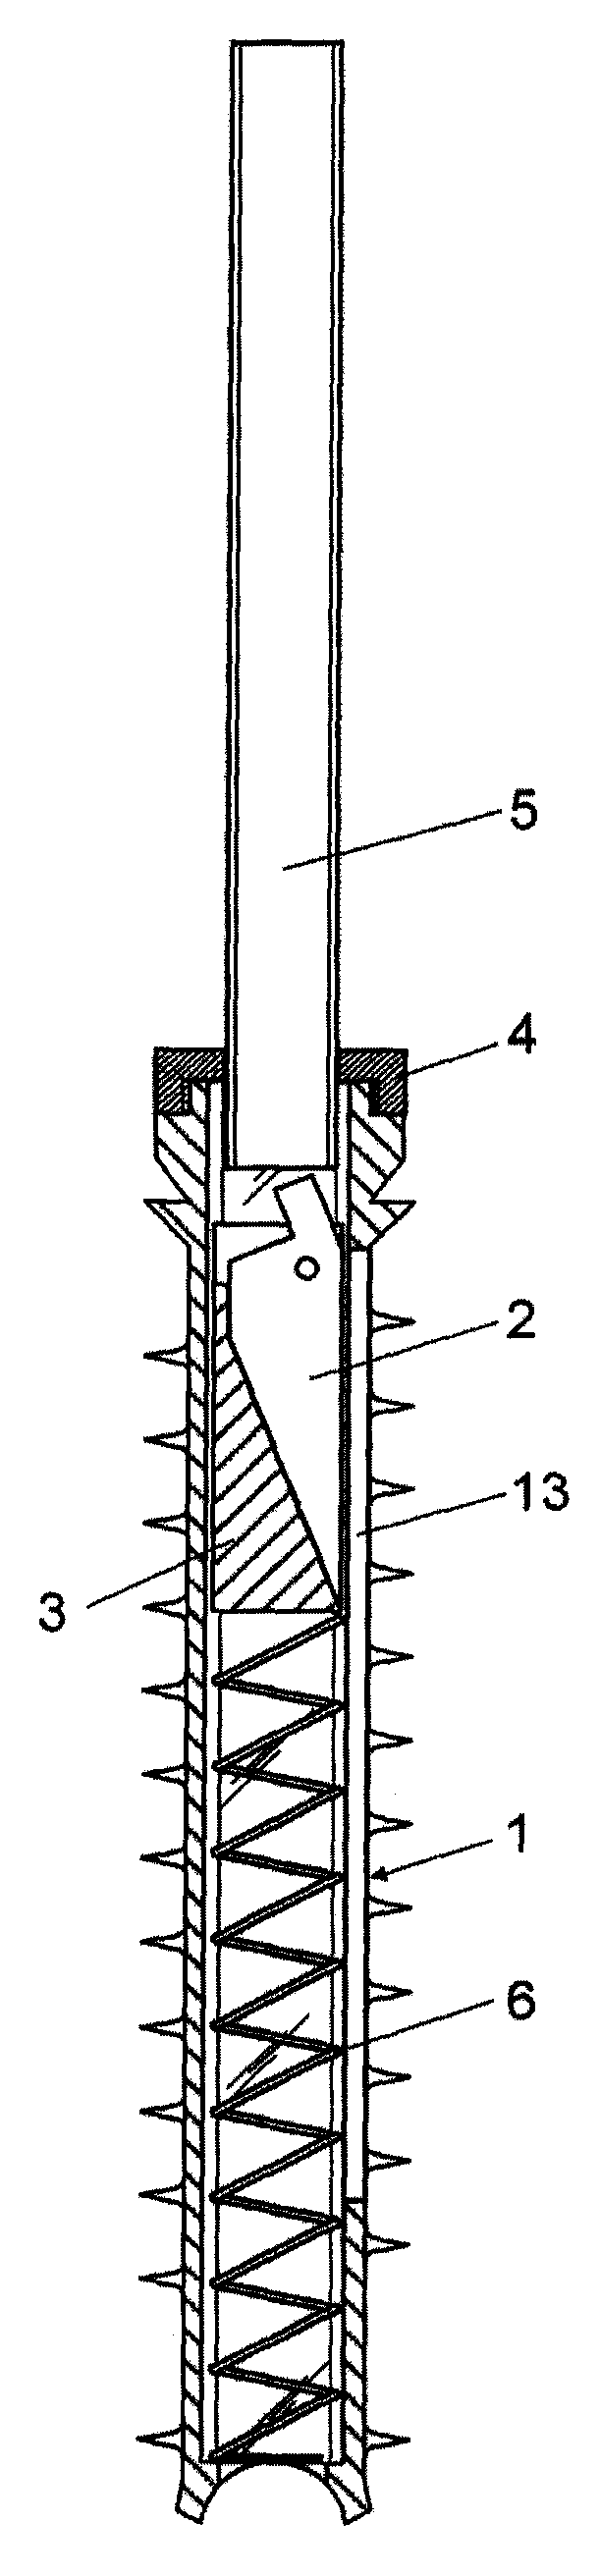 Cutting apparatus for performing osteotomy